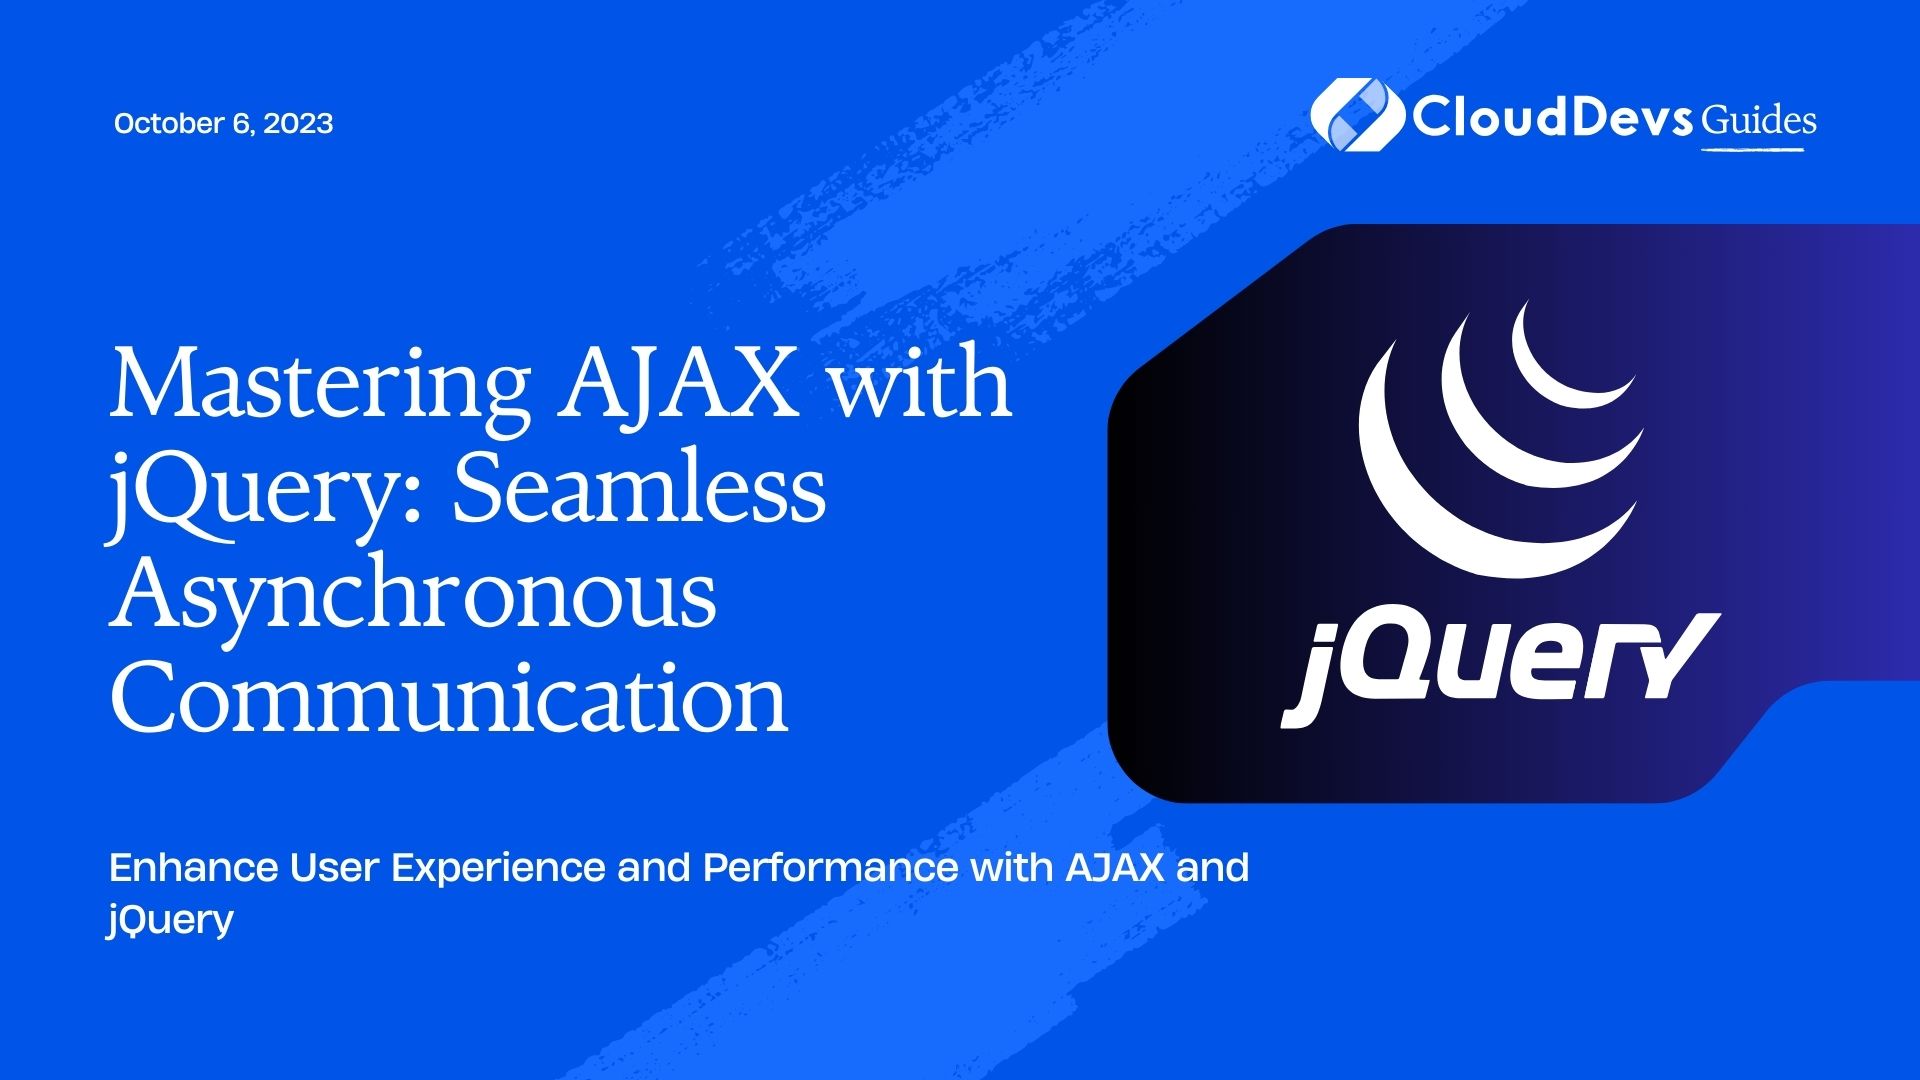 Mastering AJAX with jQuery: Seamless Asynchronous Communication